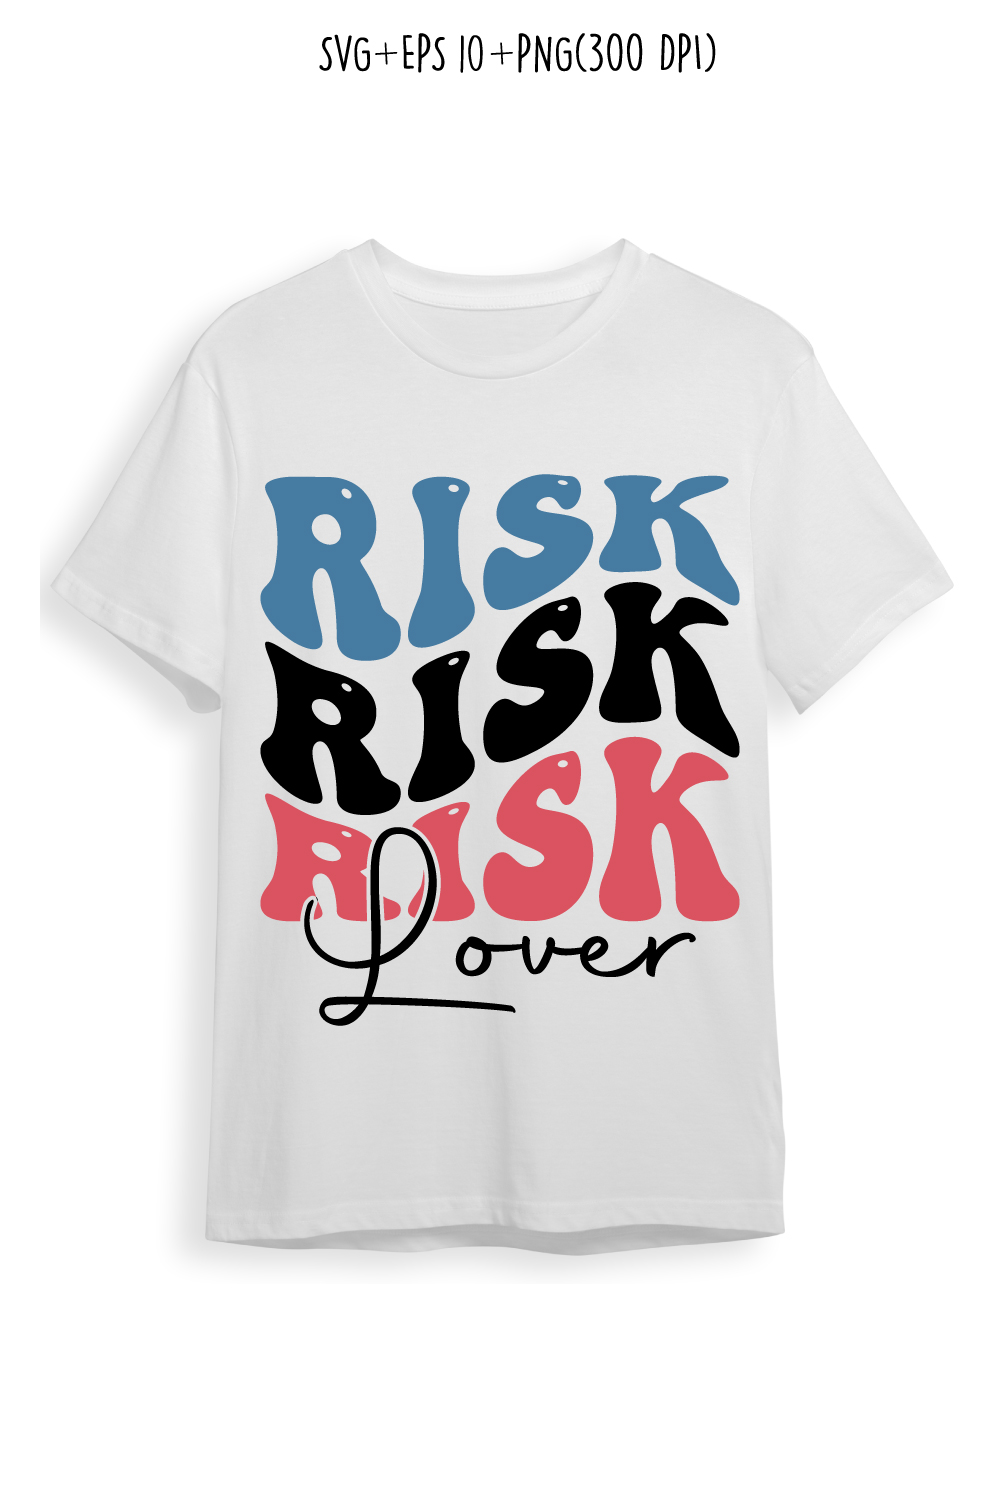 Risk lover indoor game typography design for t-shirts, cards, frame artwork, phone cases, bags, mugs, stickers, tumblers, print, etc pinterest preview image.